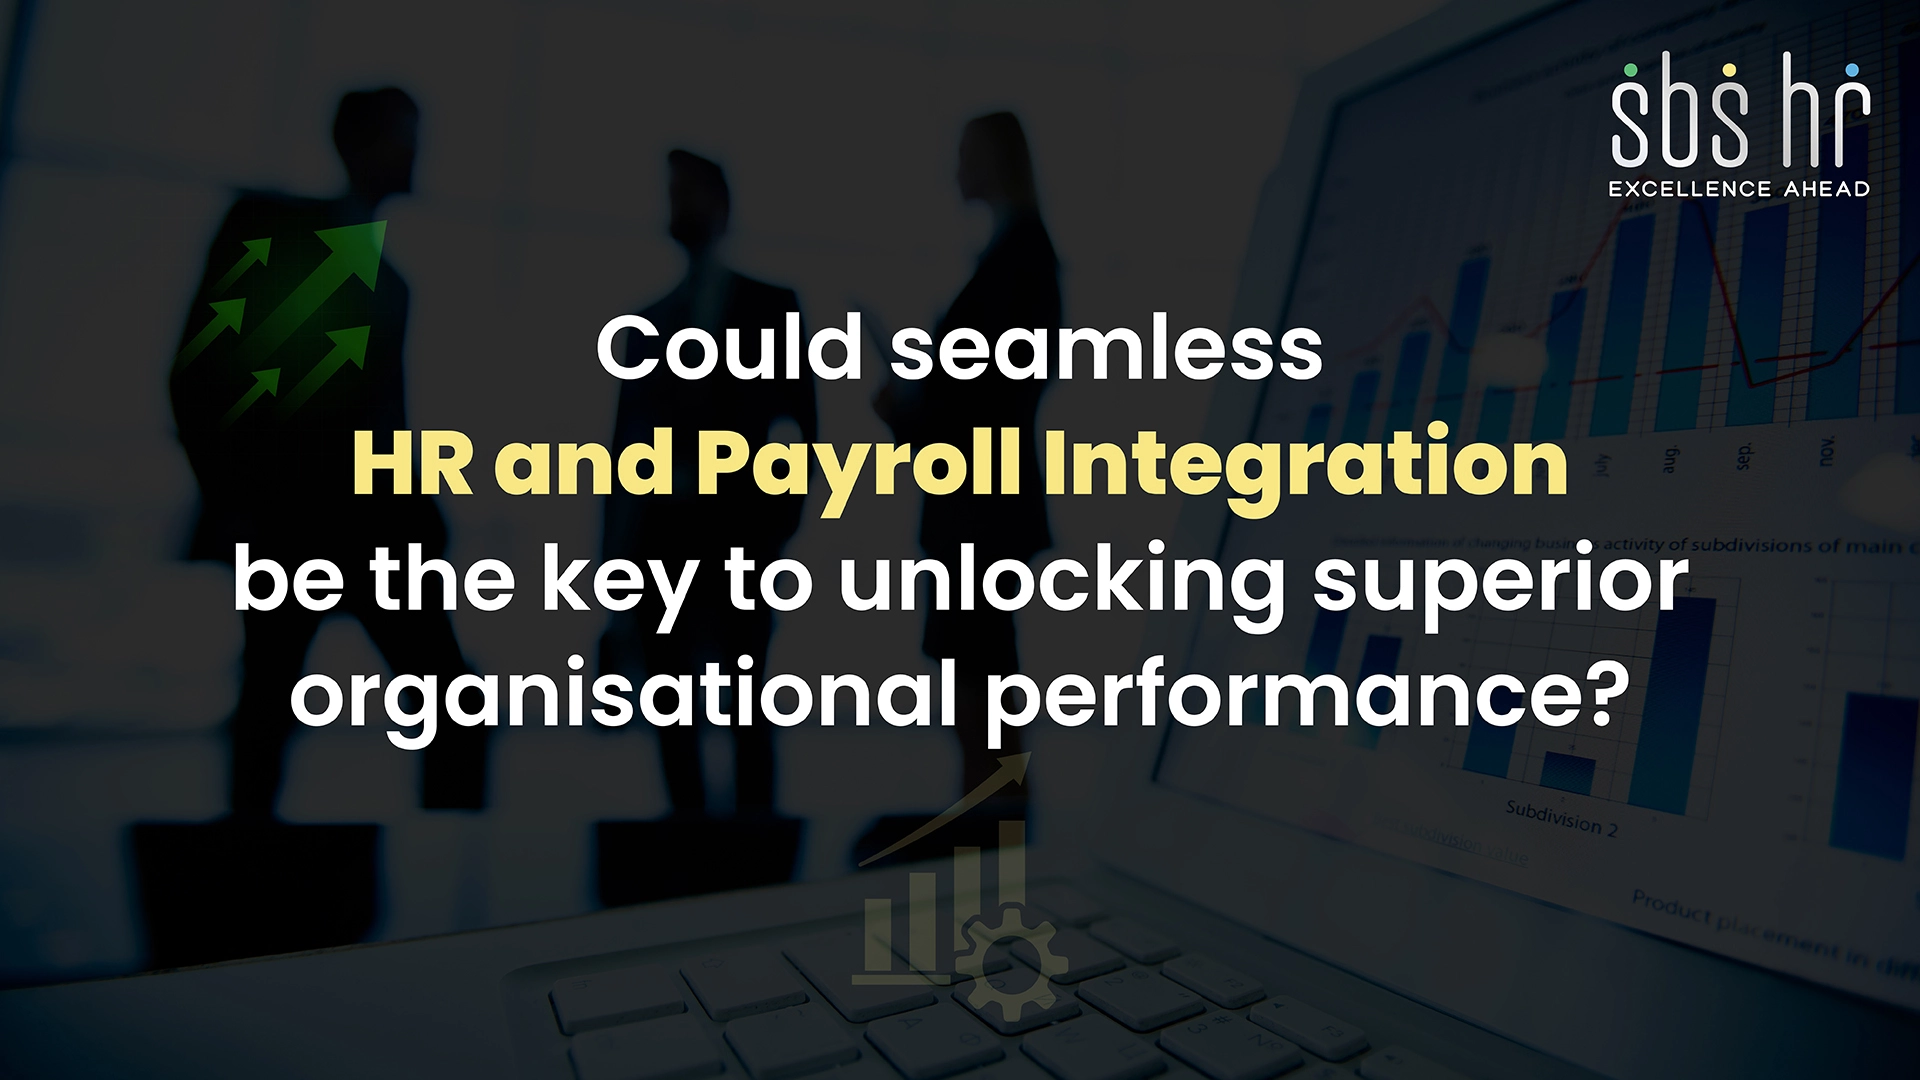 Could seamless HR and payroll integration be the key to unlocking superior organisational performance